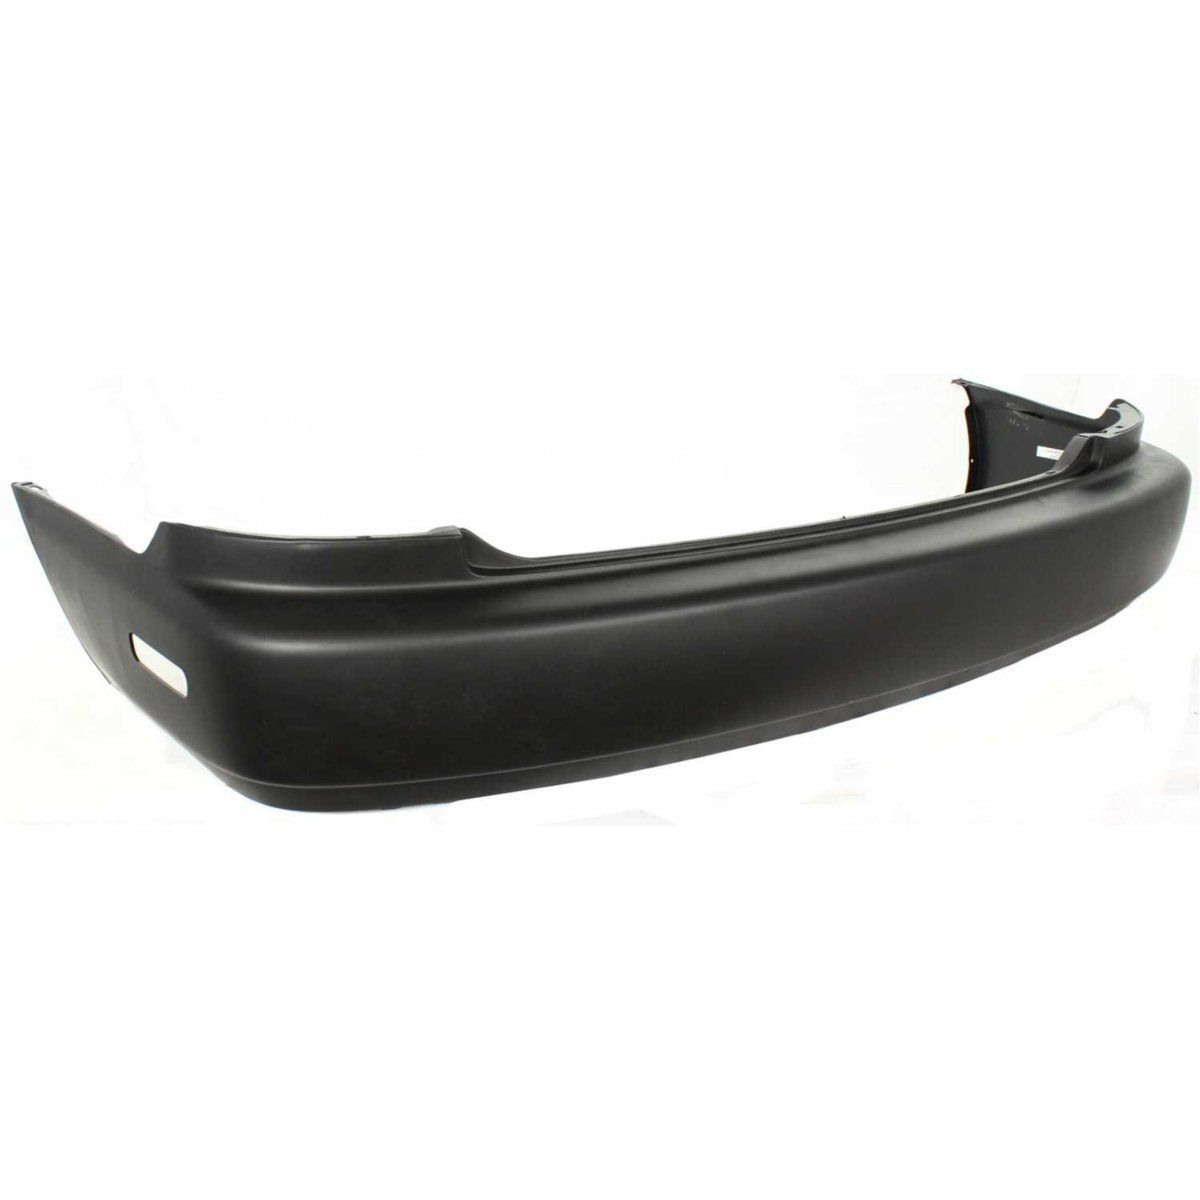 1996-1997 HONDA ACCORD Rear Bumper Cover 2dr coupe/4dr sedan Painted to Match